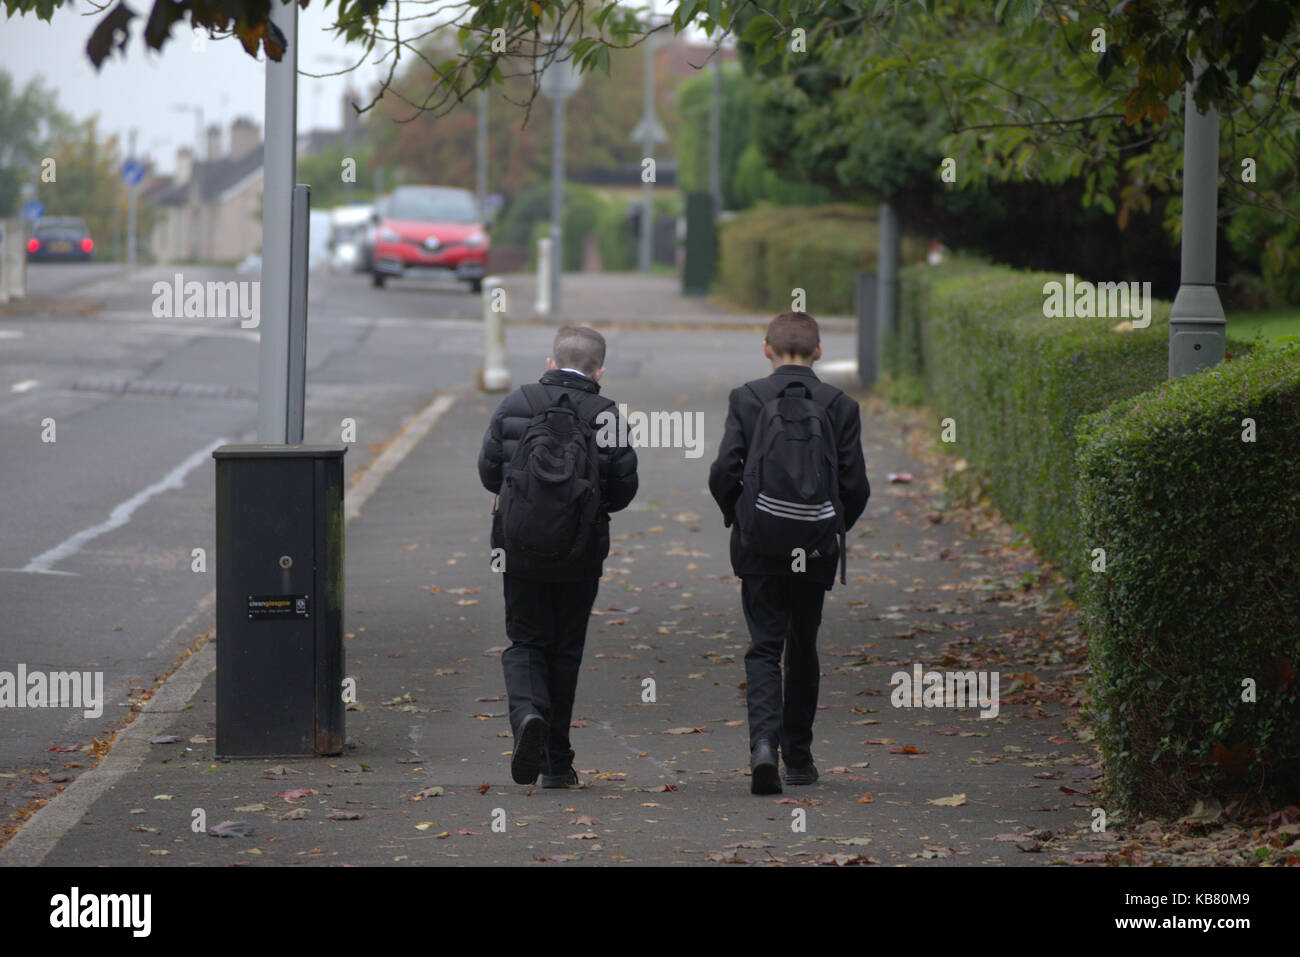 British school children boys on street messing about walking home from school together two boys car on horizon ominous Stock Photo